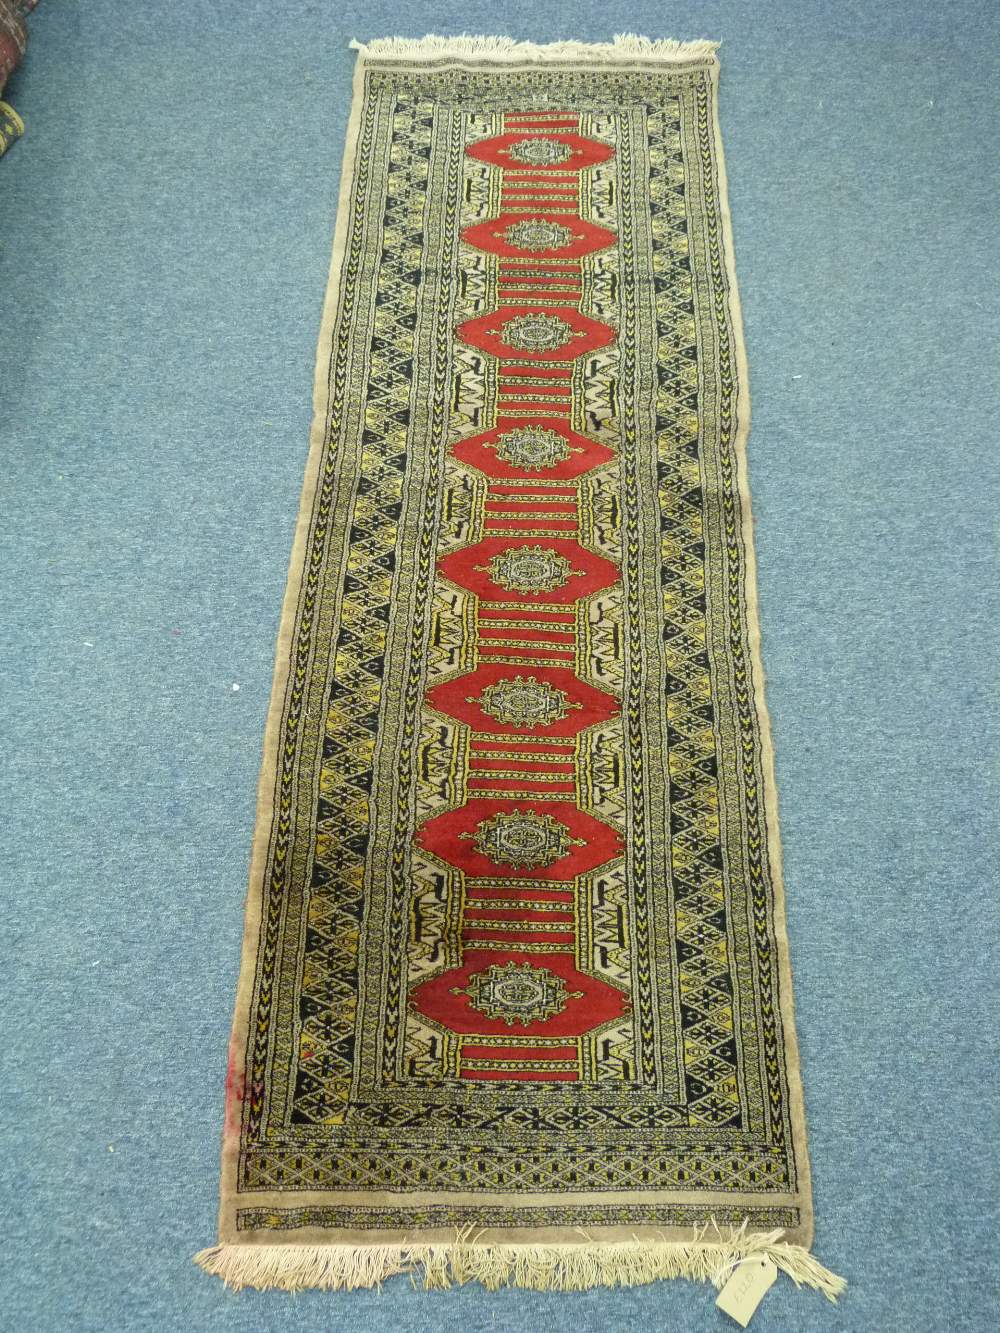 Tribal rugs; a runner of red central design on a dark gold ground, 99in x 28in (267cm x 81cm)